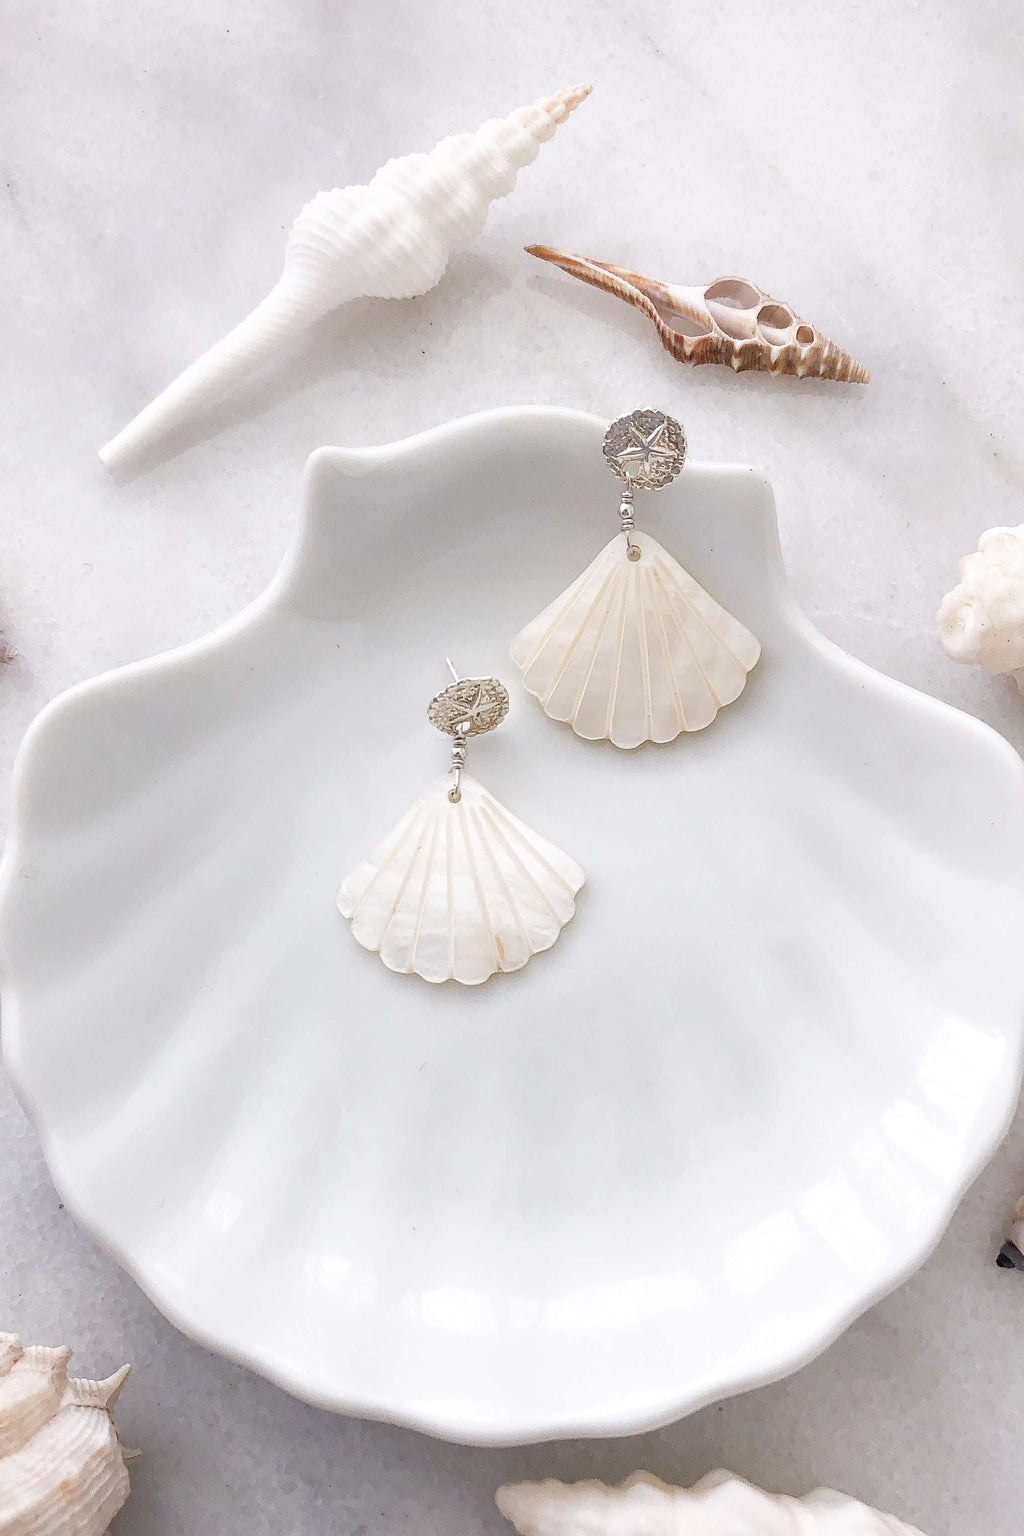 Sand Dollar &amp; Pearl Shell Studs - Silver, Earrings with  by Lunarsea Designs